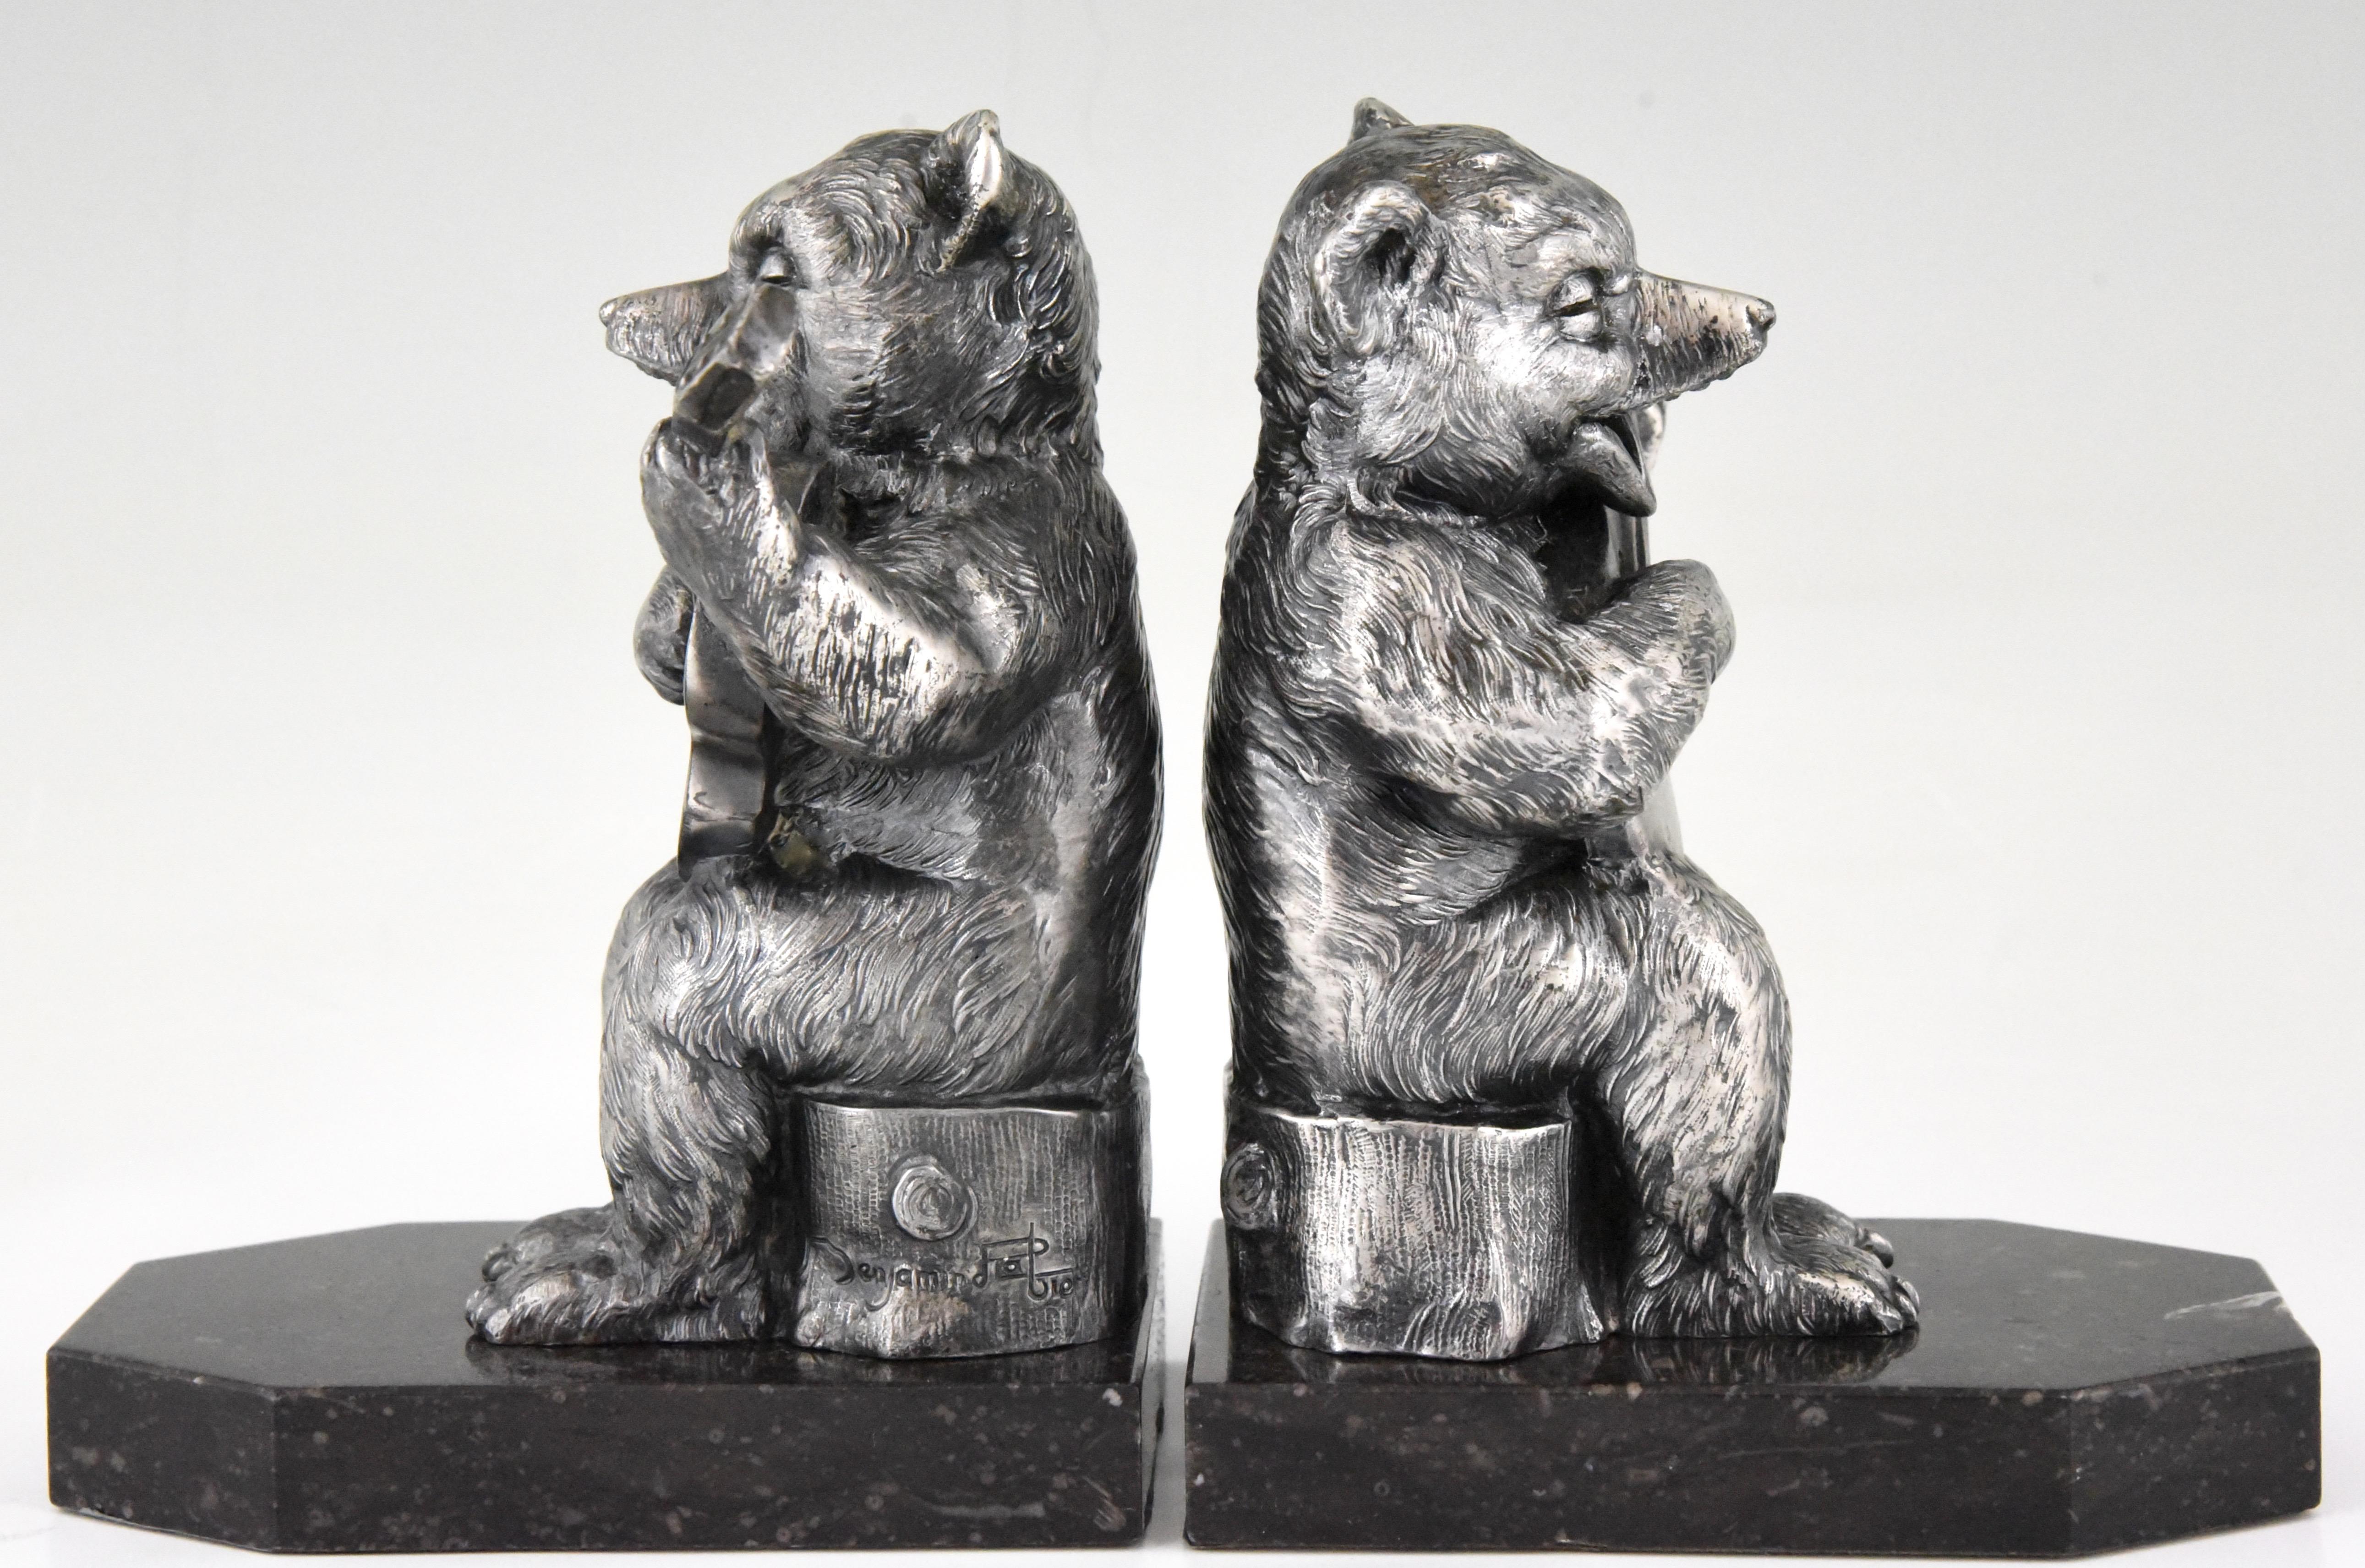 A pair of bookends by Benjamin Rabier with bears guitarists in silvered and patinated Art metal on a black marble base.
Benjamin Rabier (La Roche-sur-Yon, Vendee, December 30, 1864 - Faverolles, October 10, 1939) was a French illustrator, comic